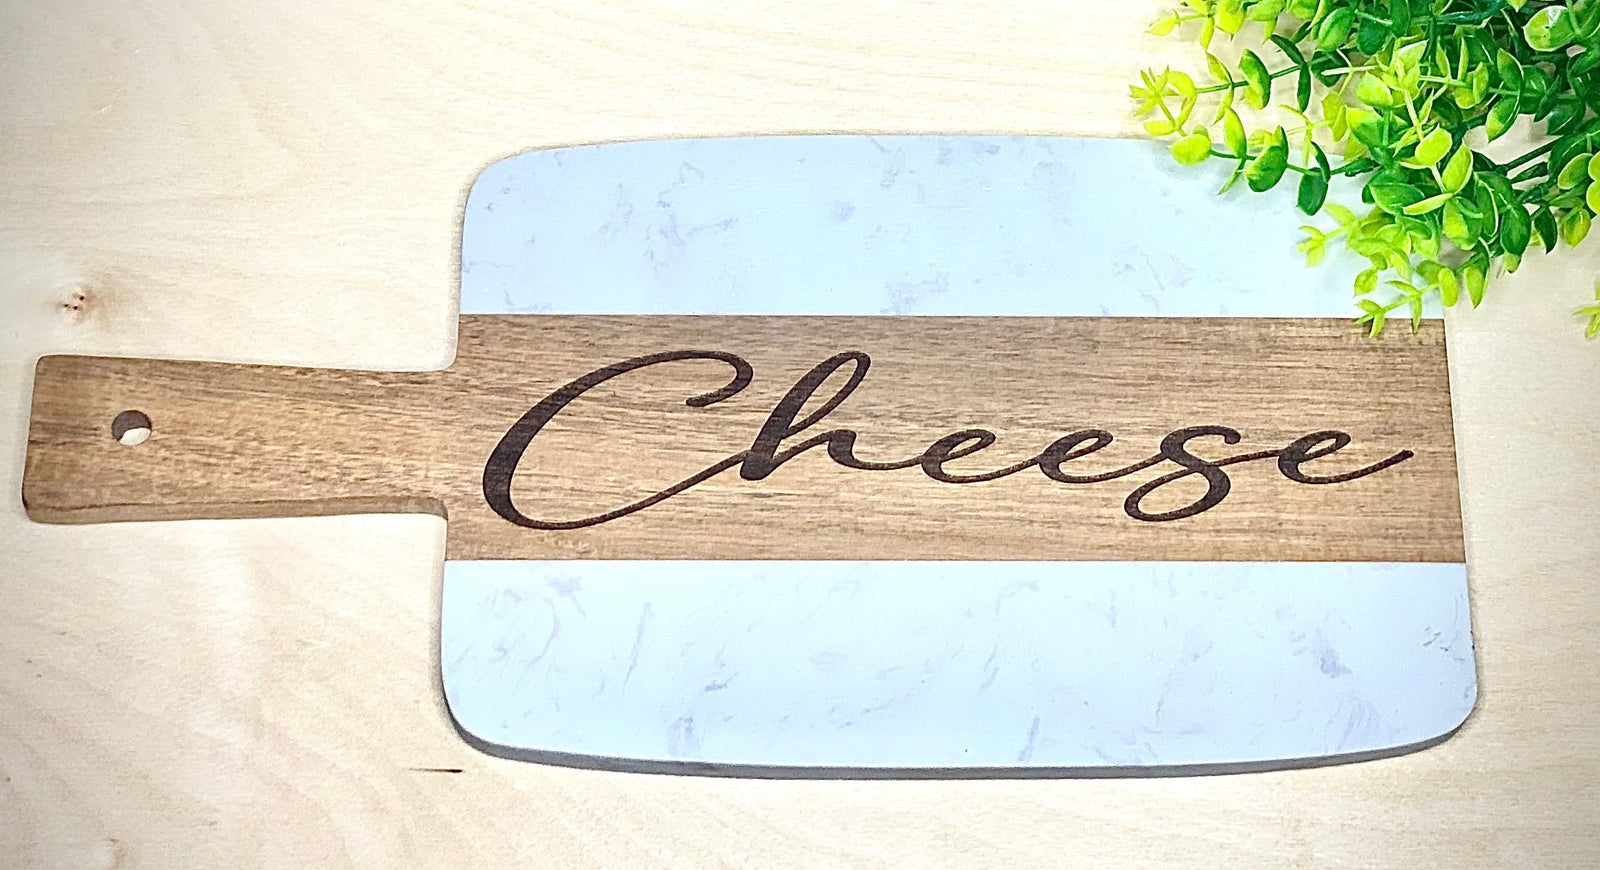 Personalized Marble Charcuterie Board